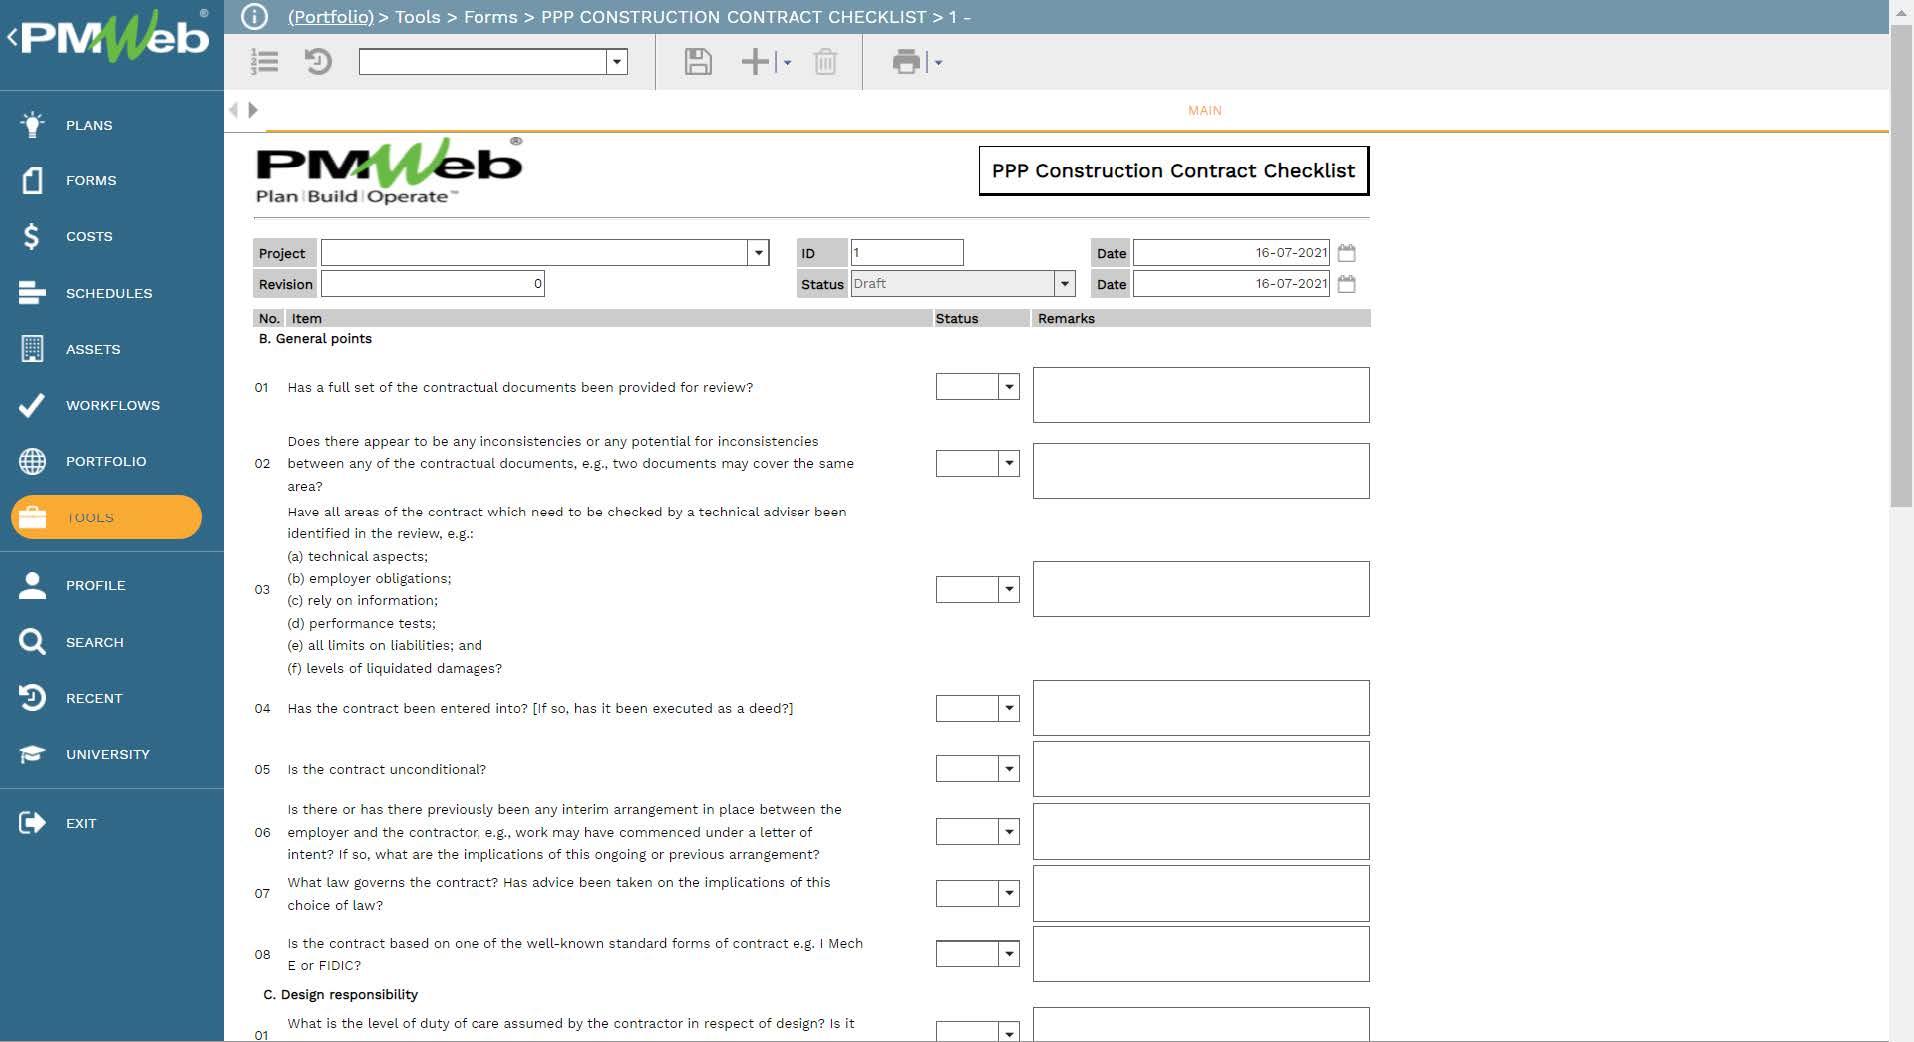 PMWeb 7 Tools Form Builder PPP Construction Contract Checklist 
Main